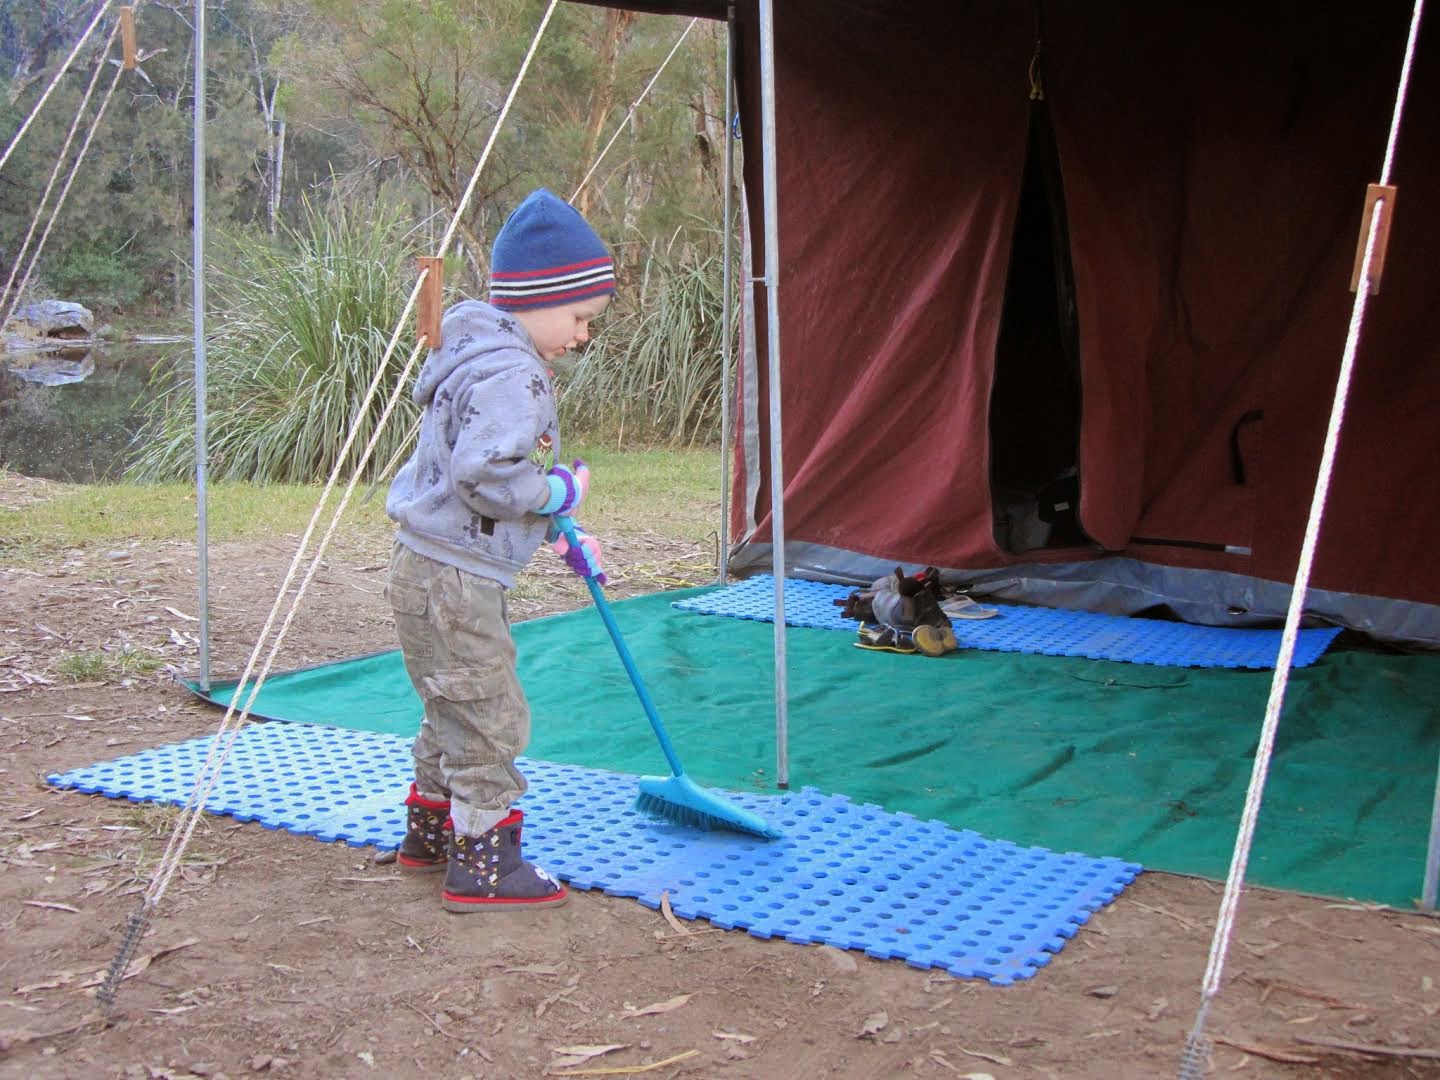 children and camping independence and learning